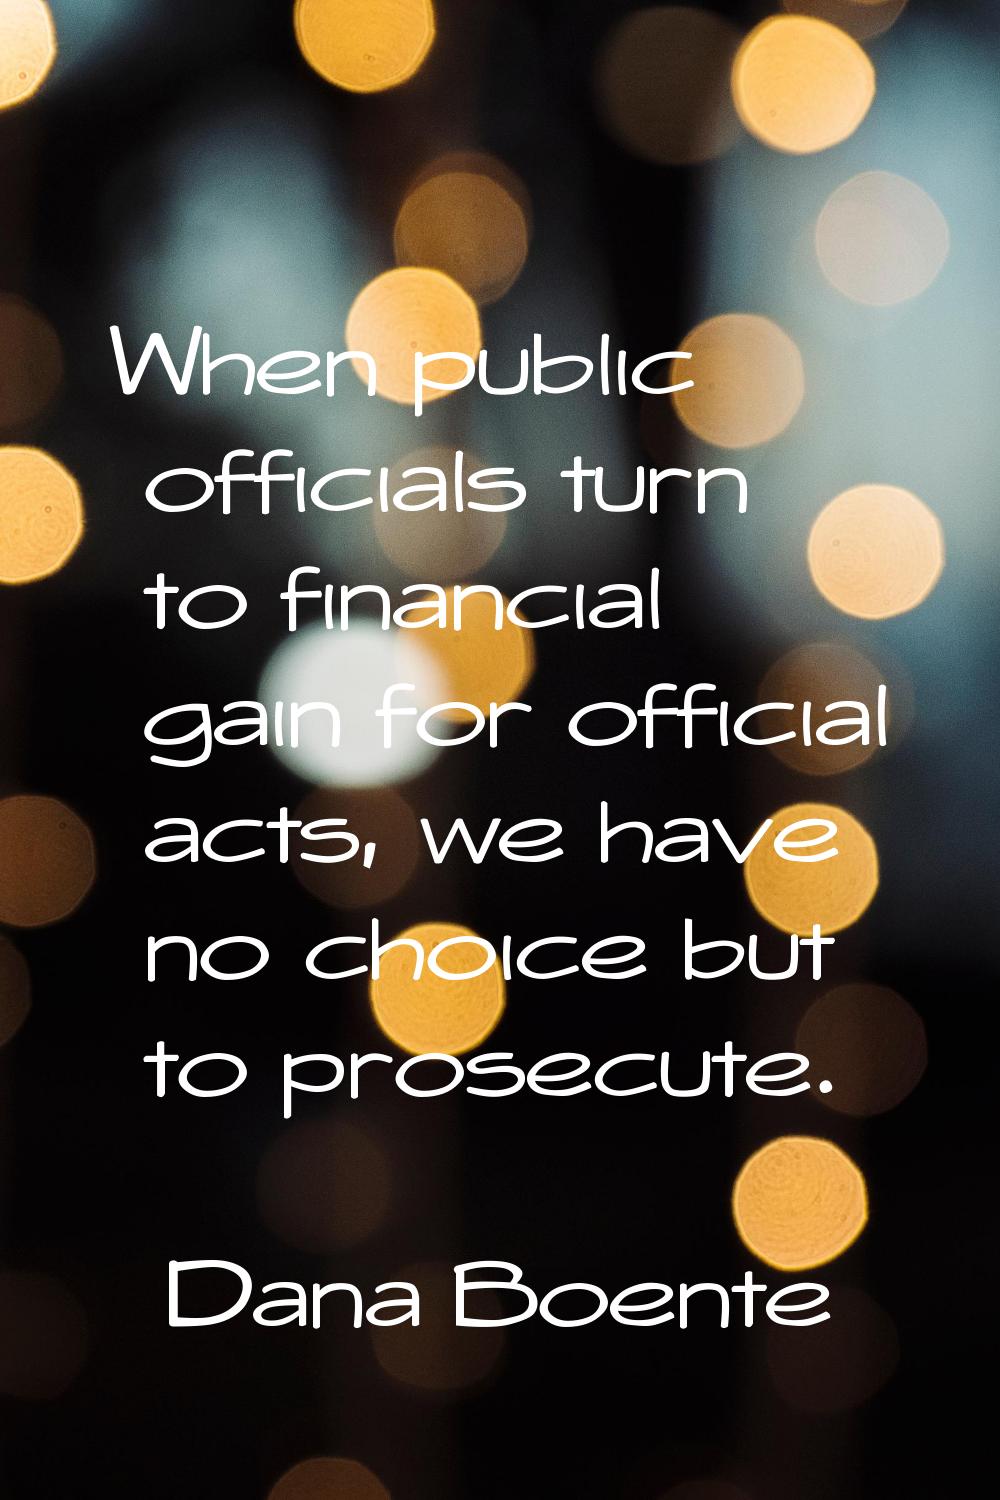 When public officials turn to financial gain for official acts, we have no choice but to prosecute.